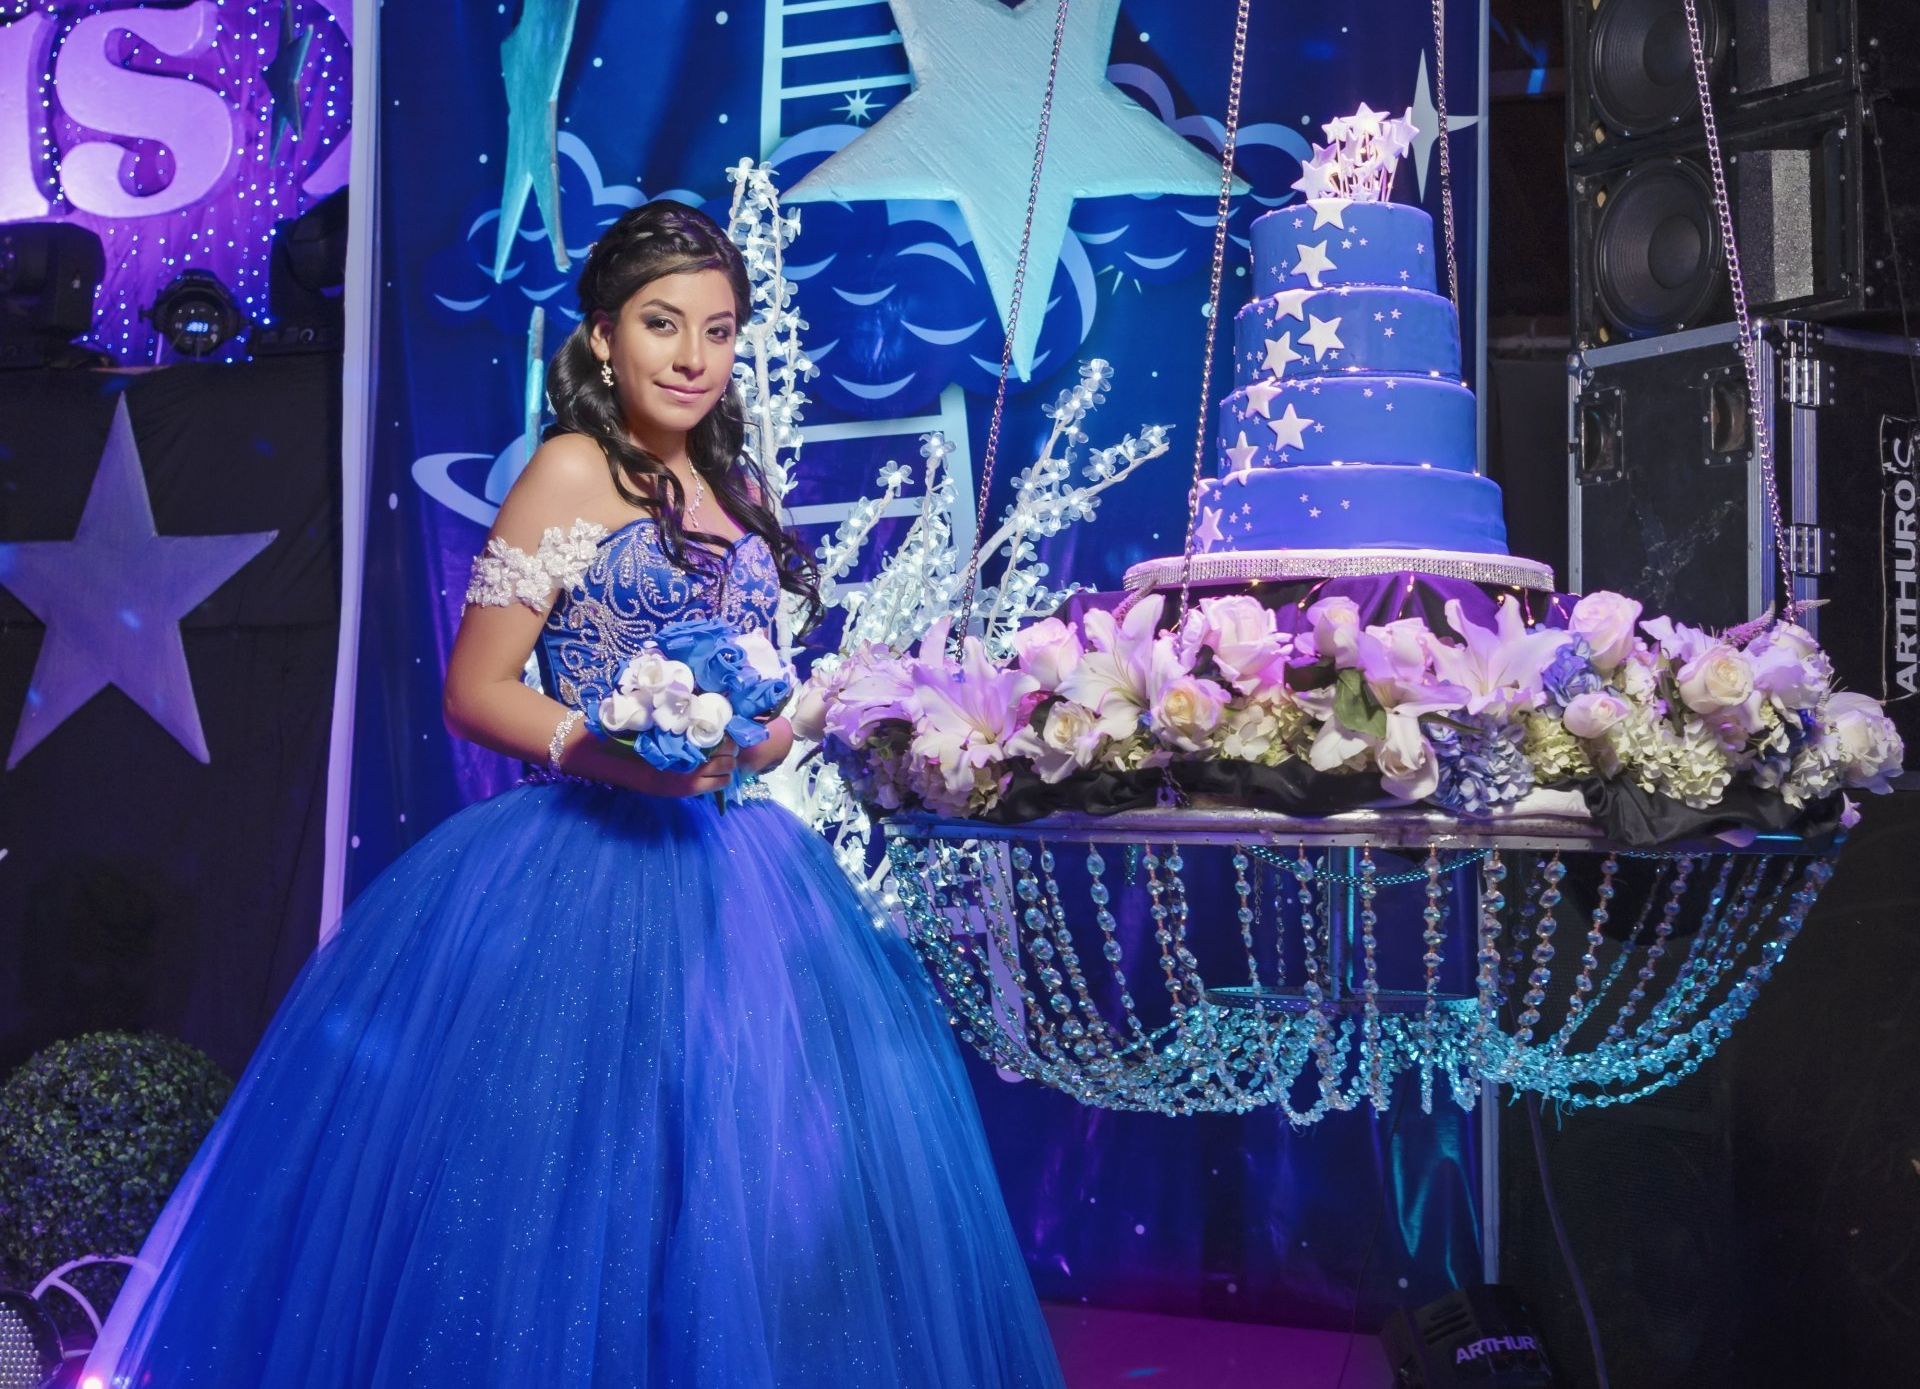 A Quinceanera Celebration in San Antonio, Texas using a Flash Party Photo Booth Rental